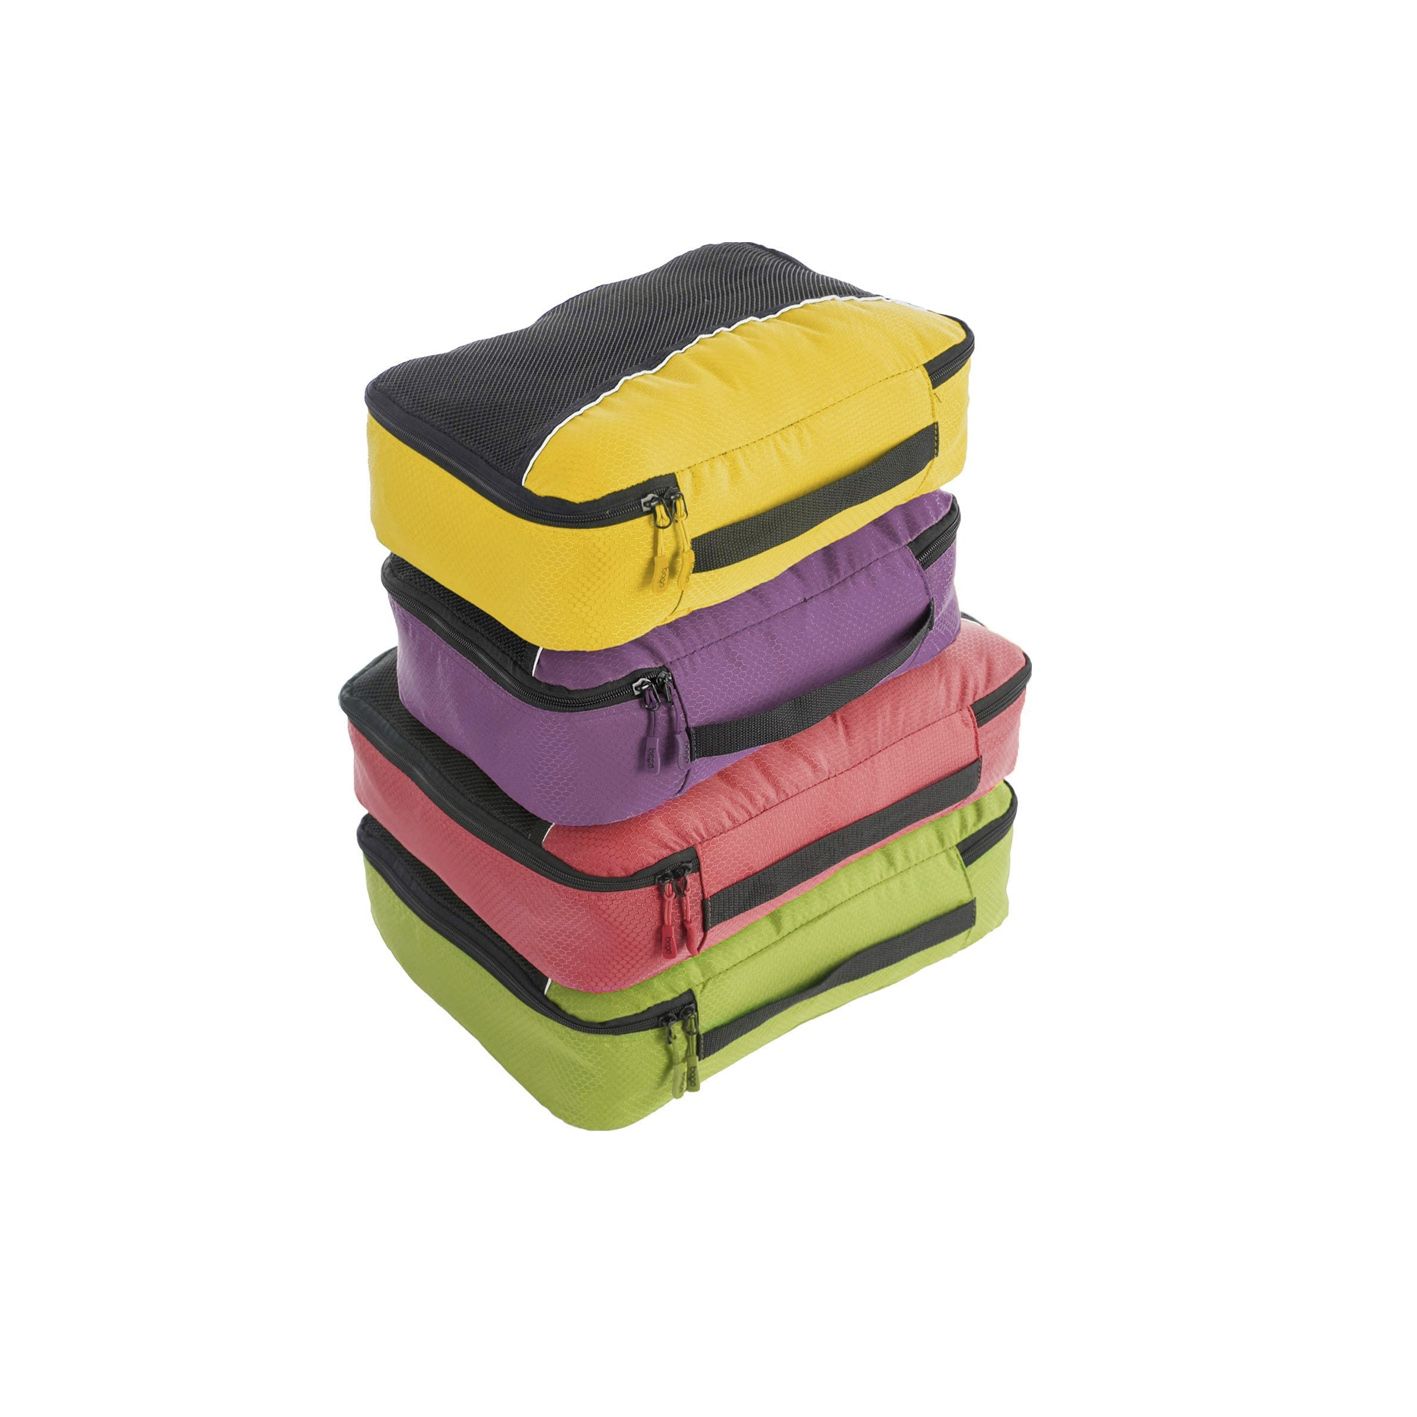 Compression Packing Cubes, Packing Cubes for Travel